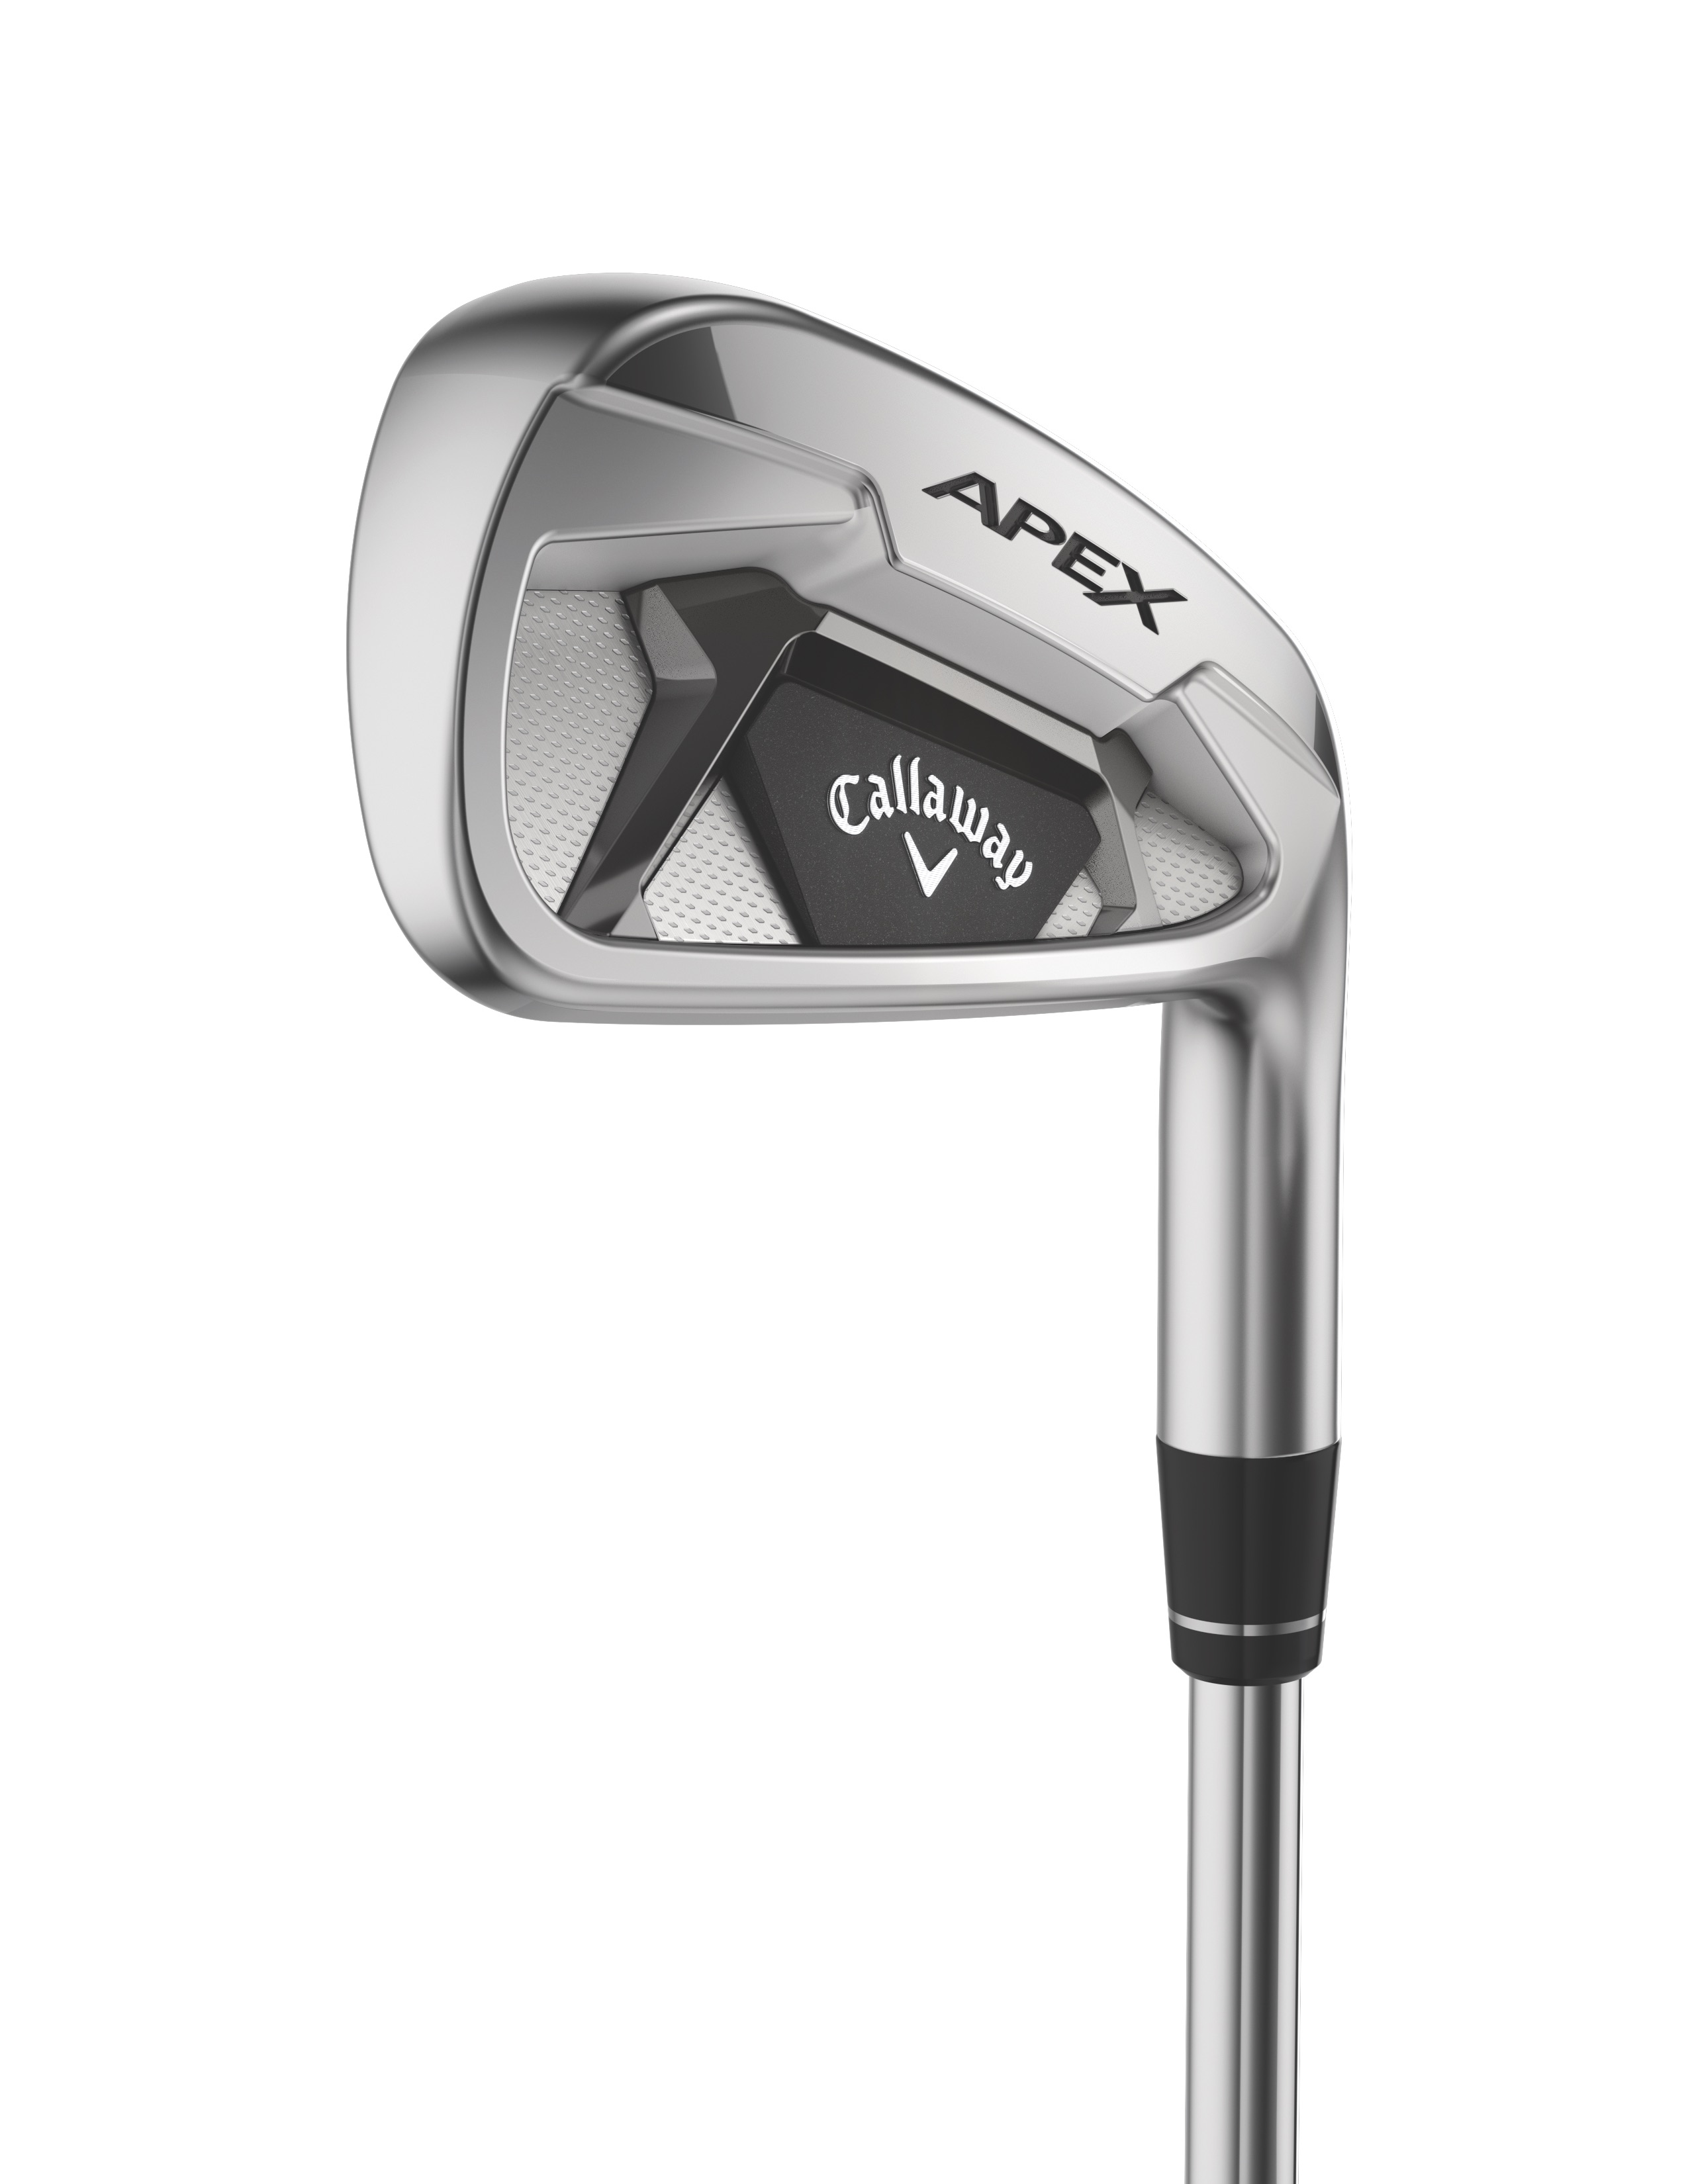 Callaway S New Apex Irons And Hybrids Are Designed To Bring Out The Better Golfer In You Golf Equipment Clubs Balls Bags Golf Digest